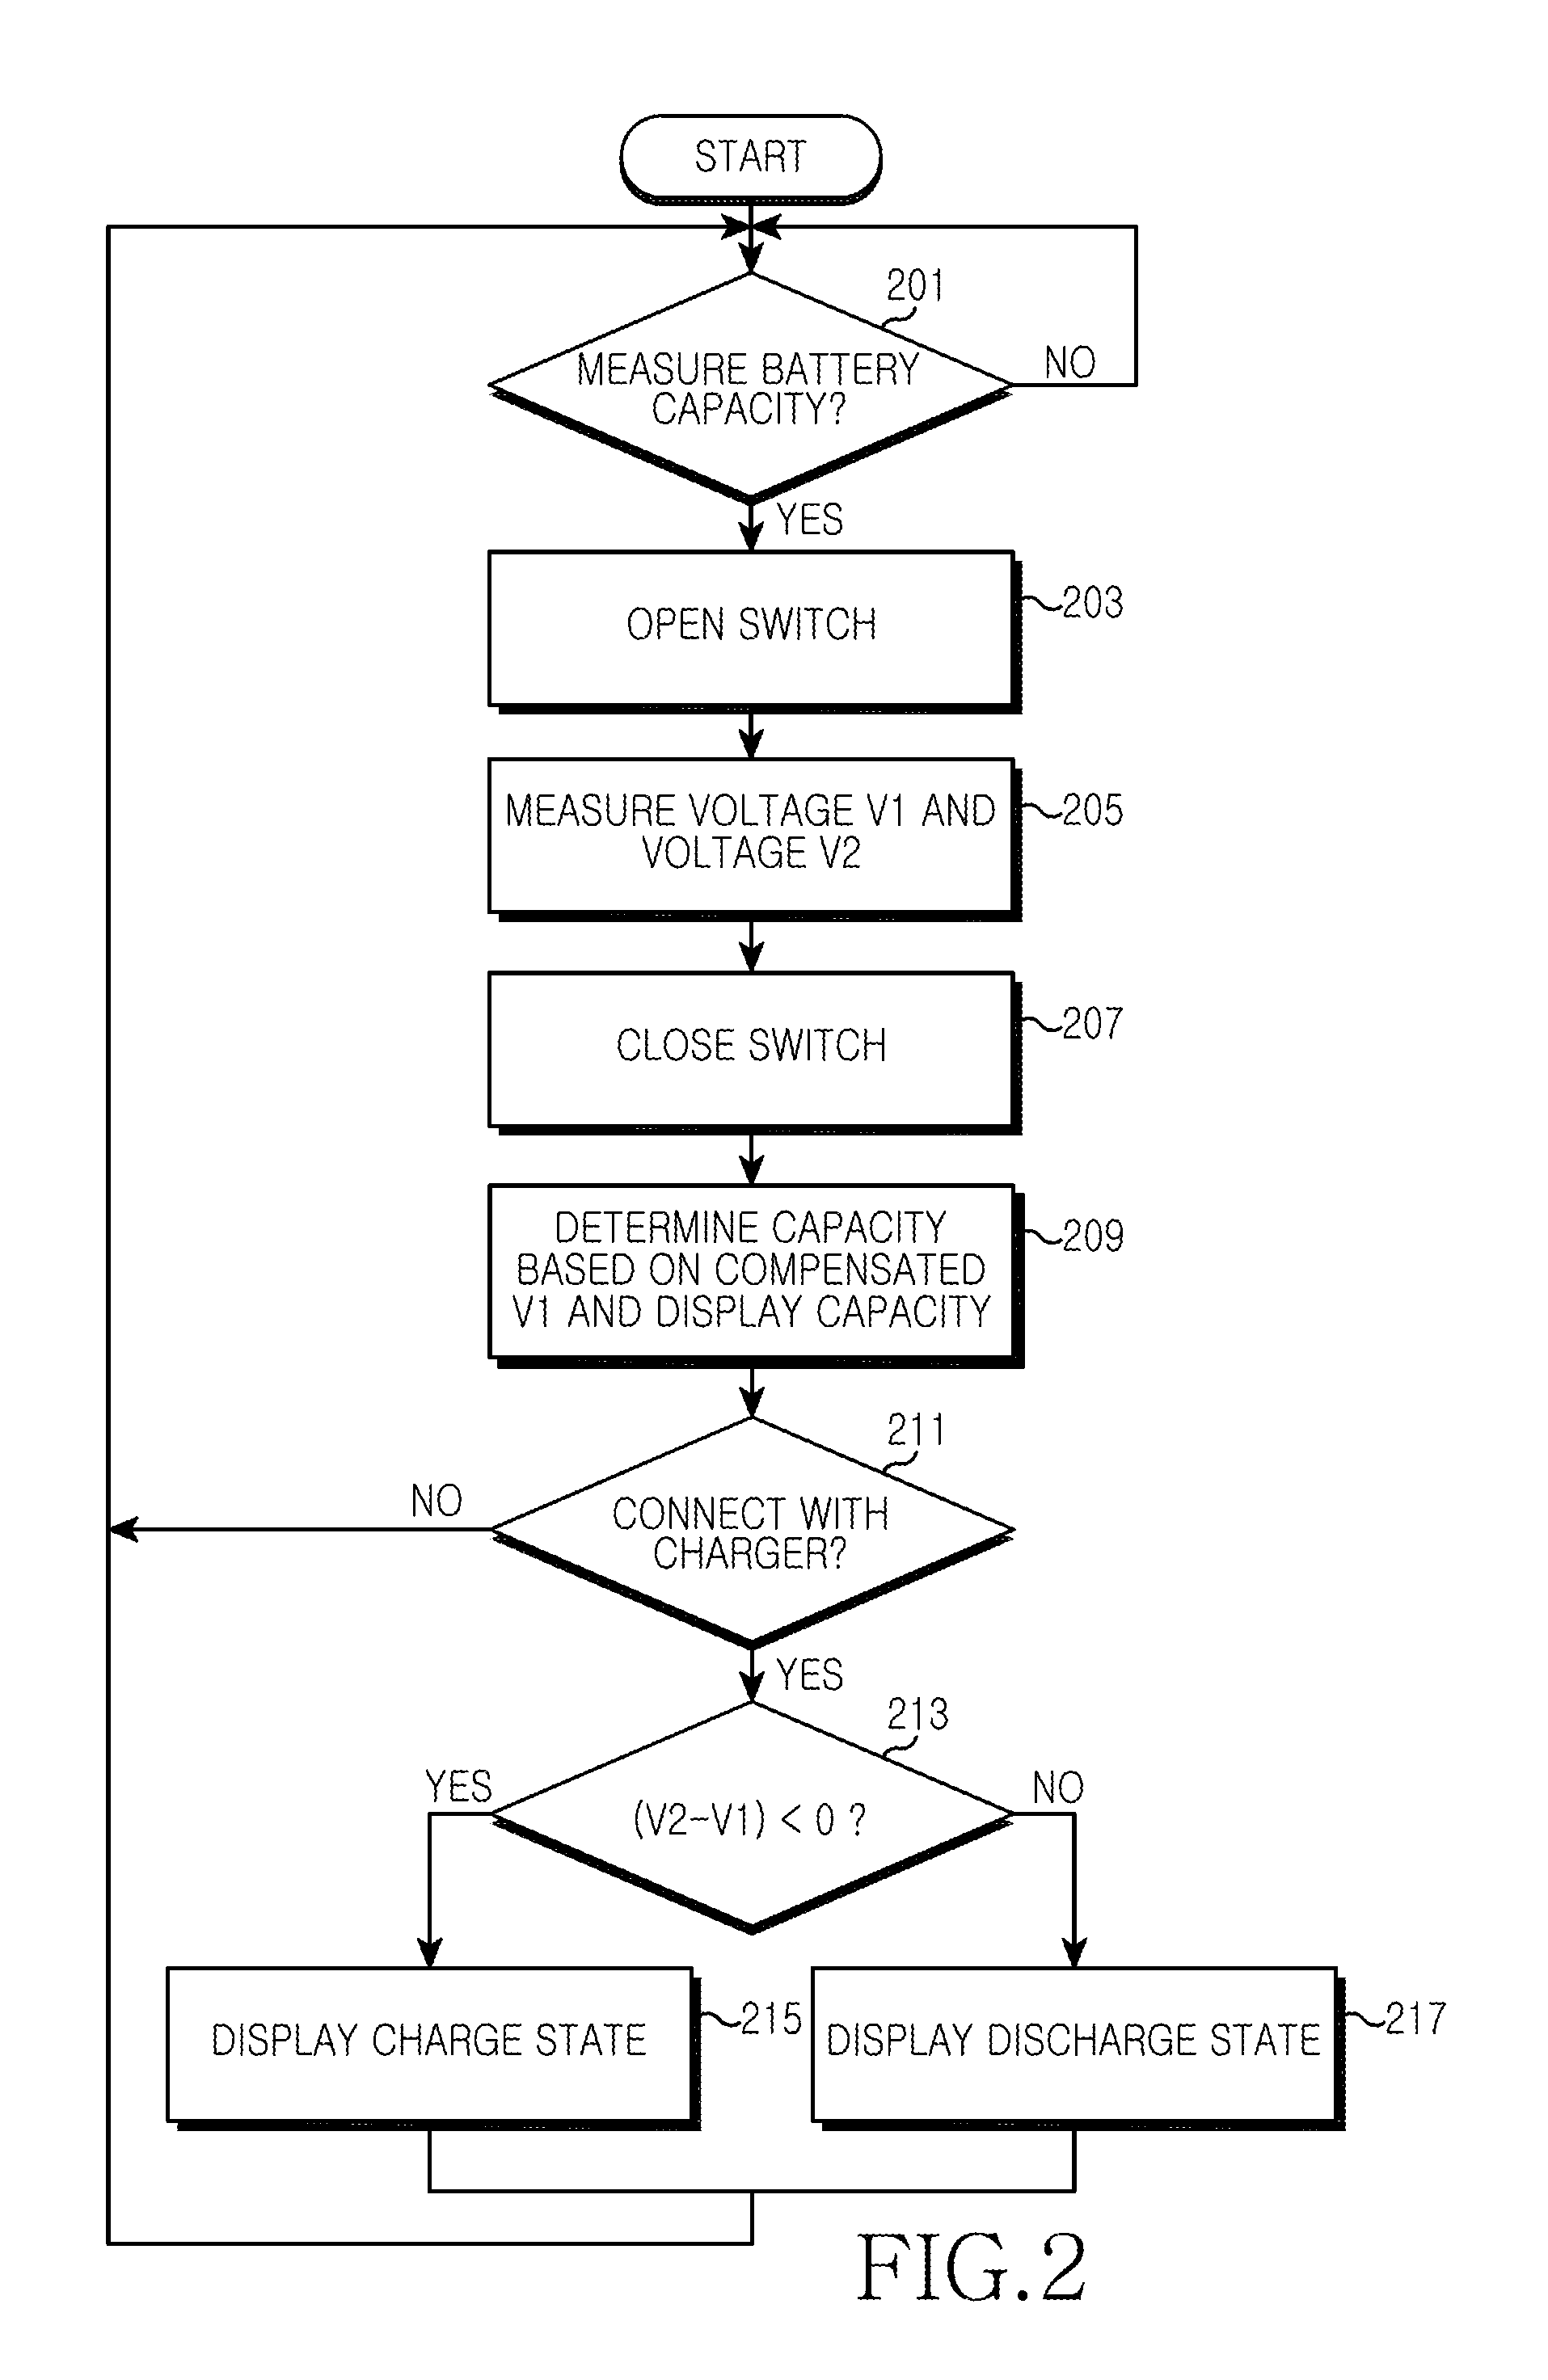 Apparatus and method for displaying capacity and charge/discharge state of battery in portable device